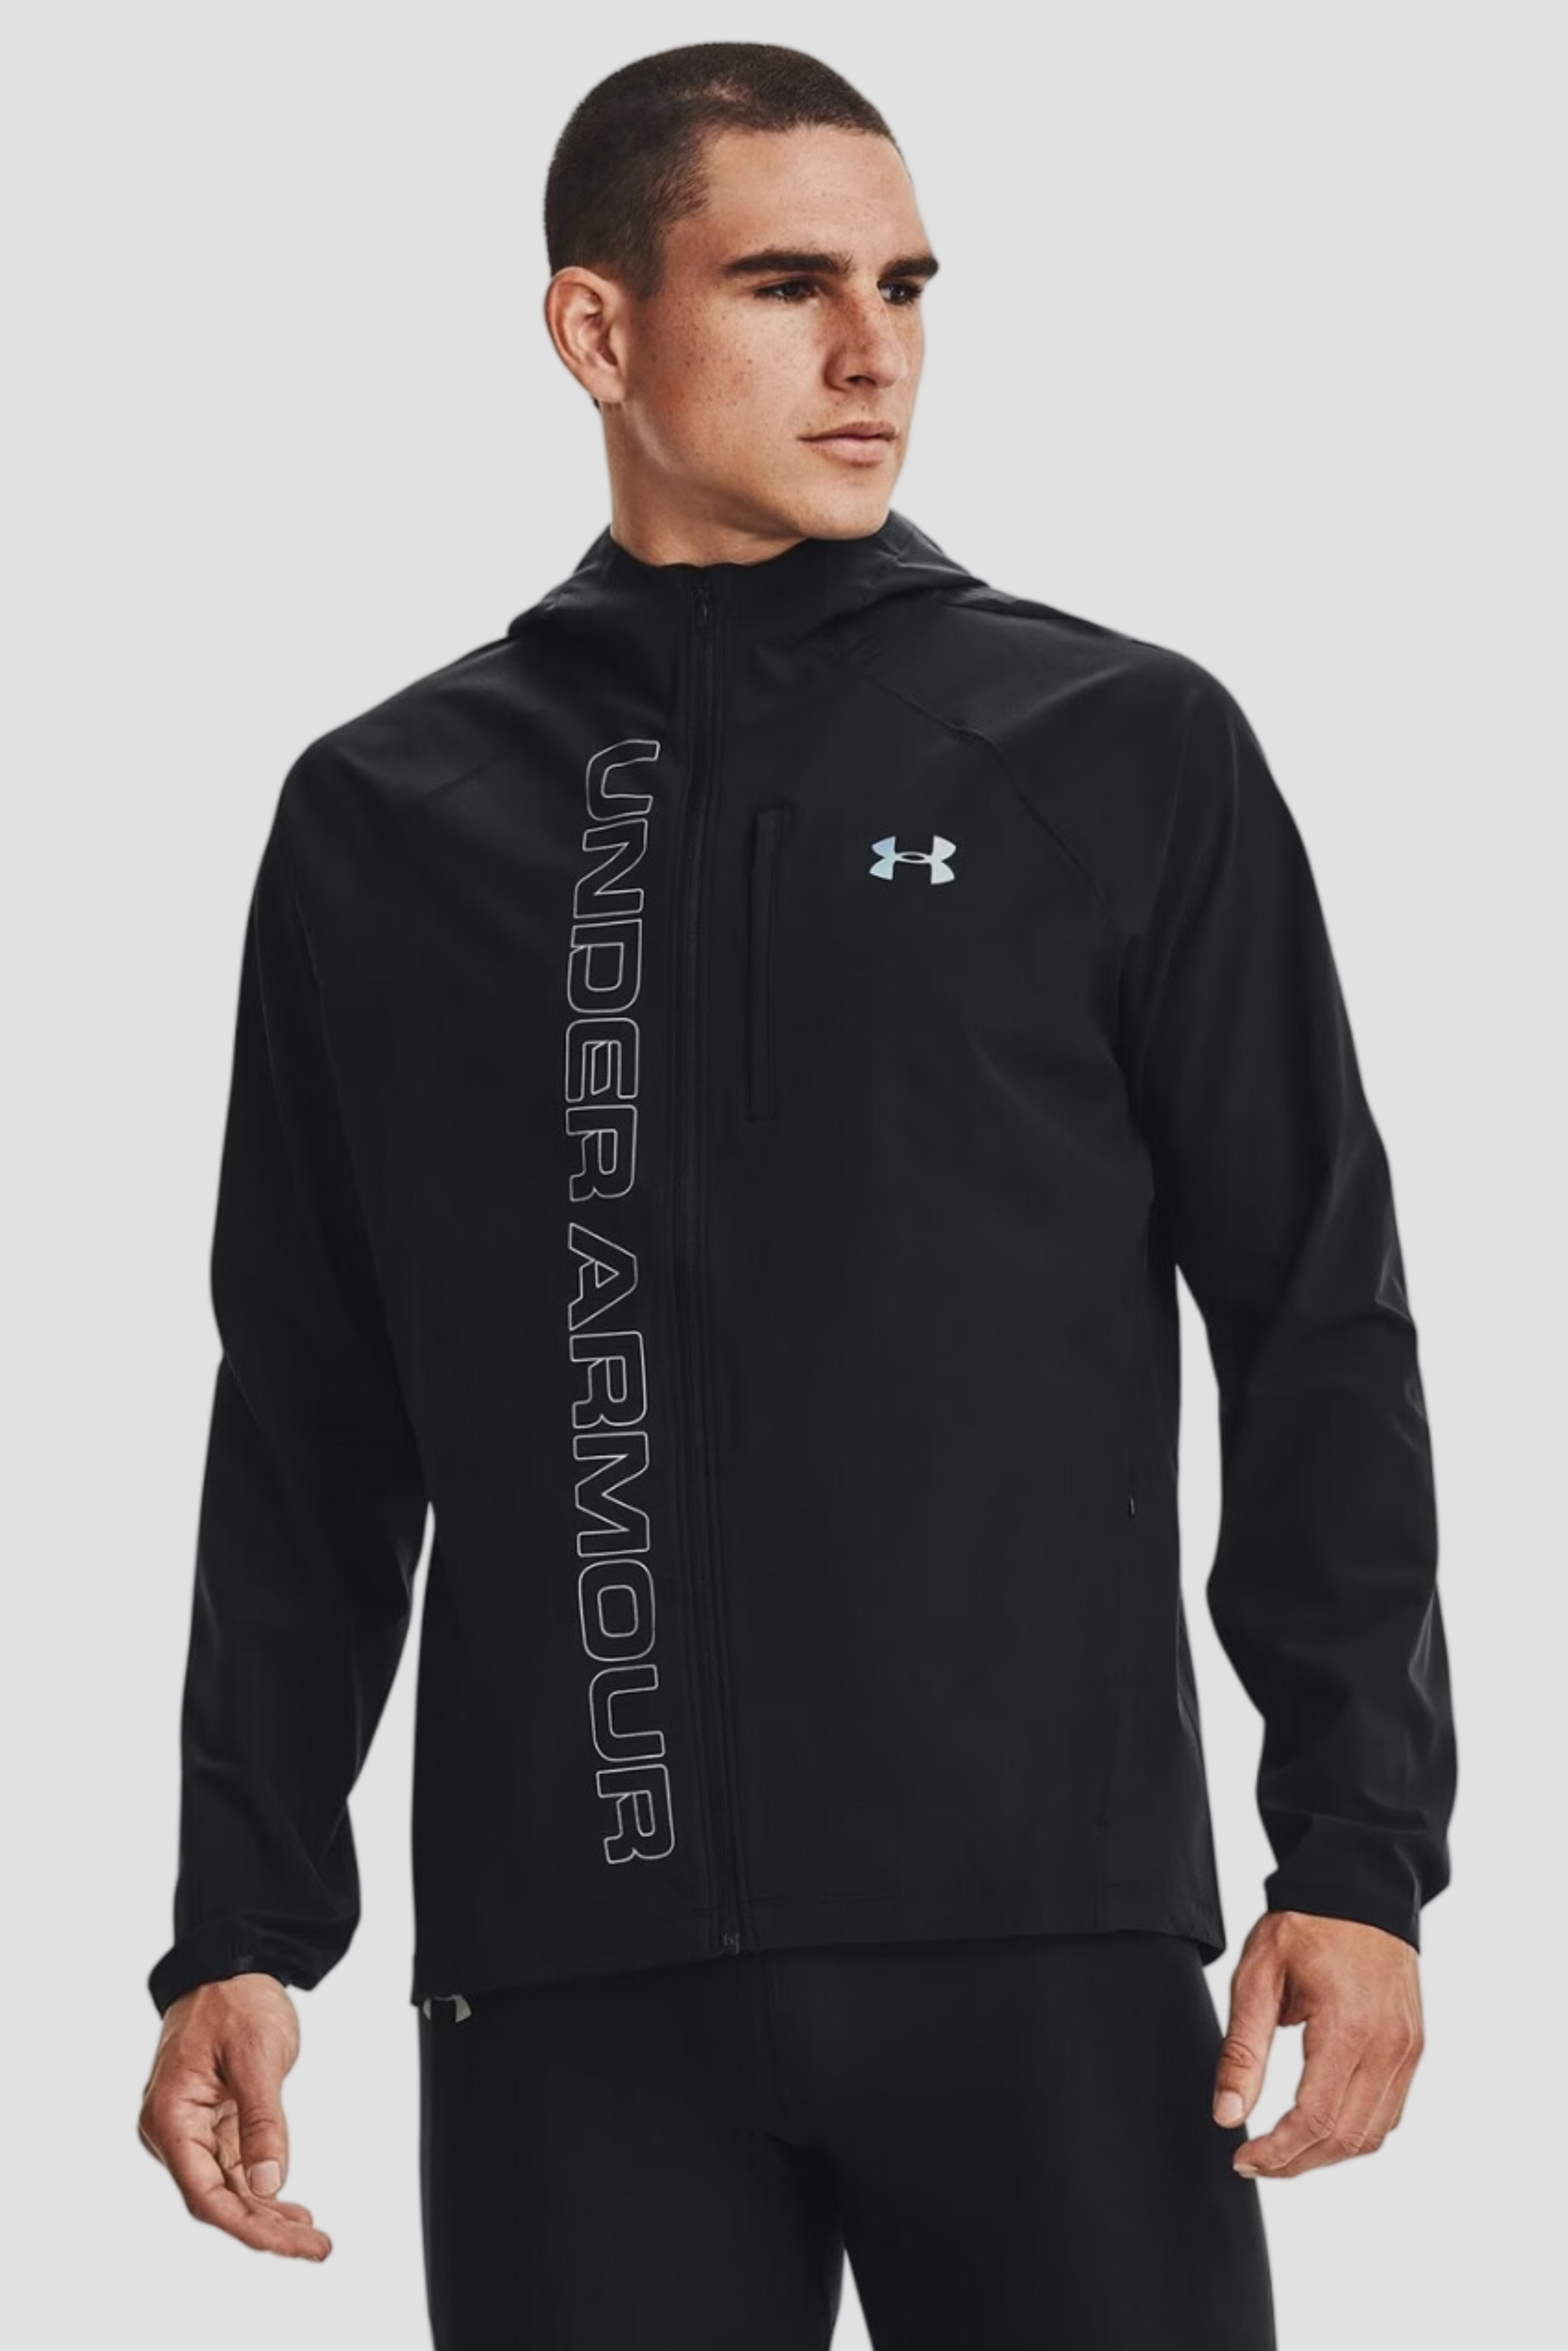 UNDER ARMOUR OUTRUN THE STORM JACKET 'BLACK'